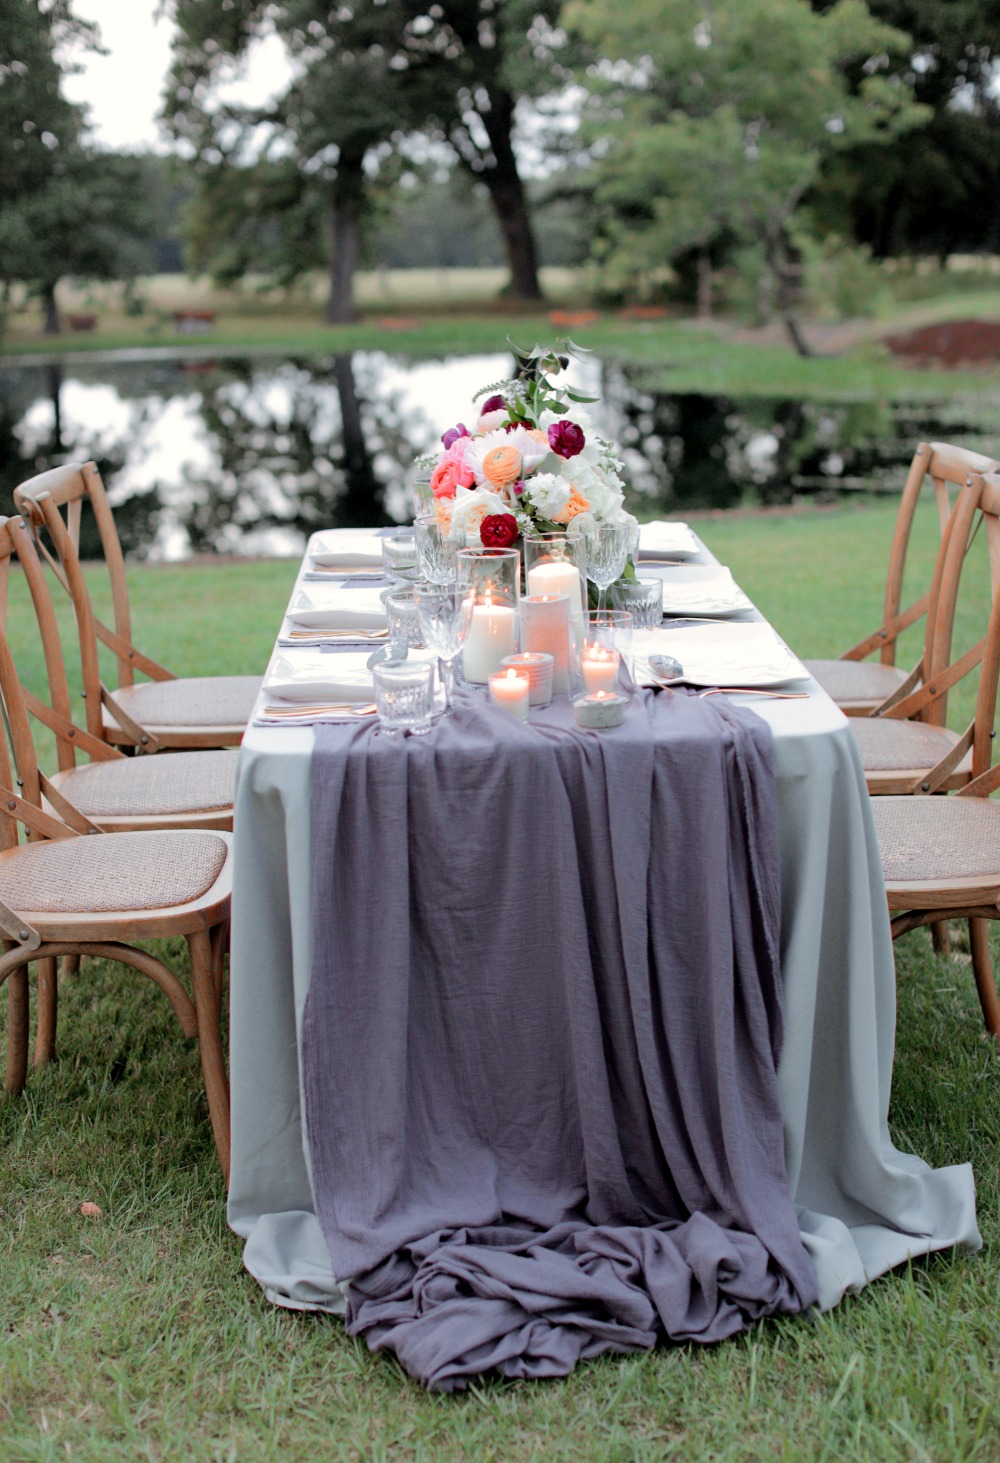 Beautiful candle lit tablescape